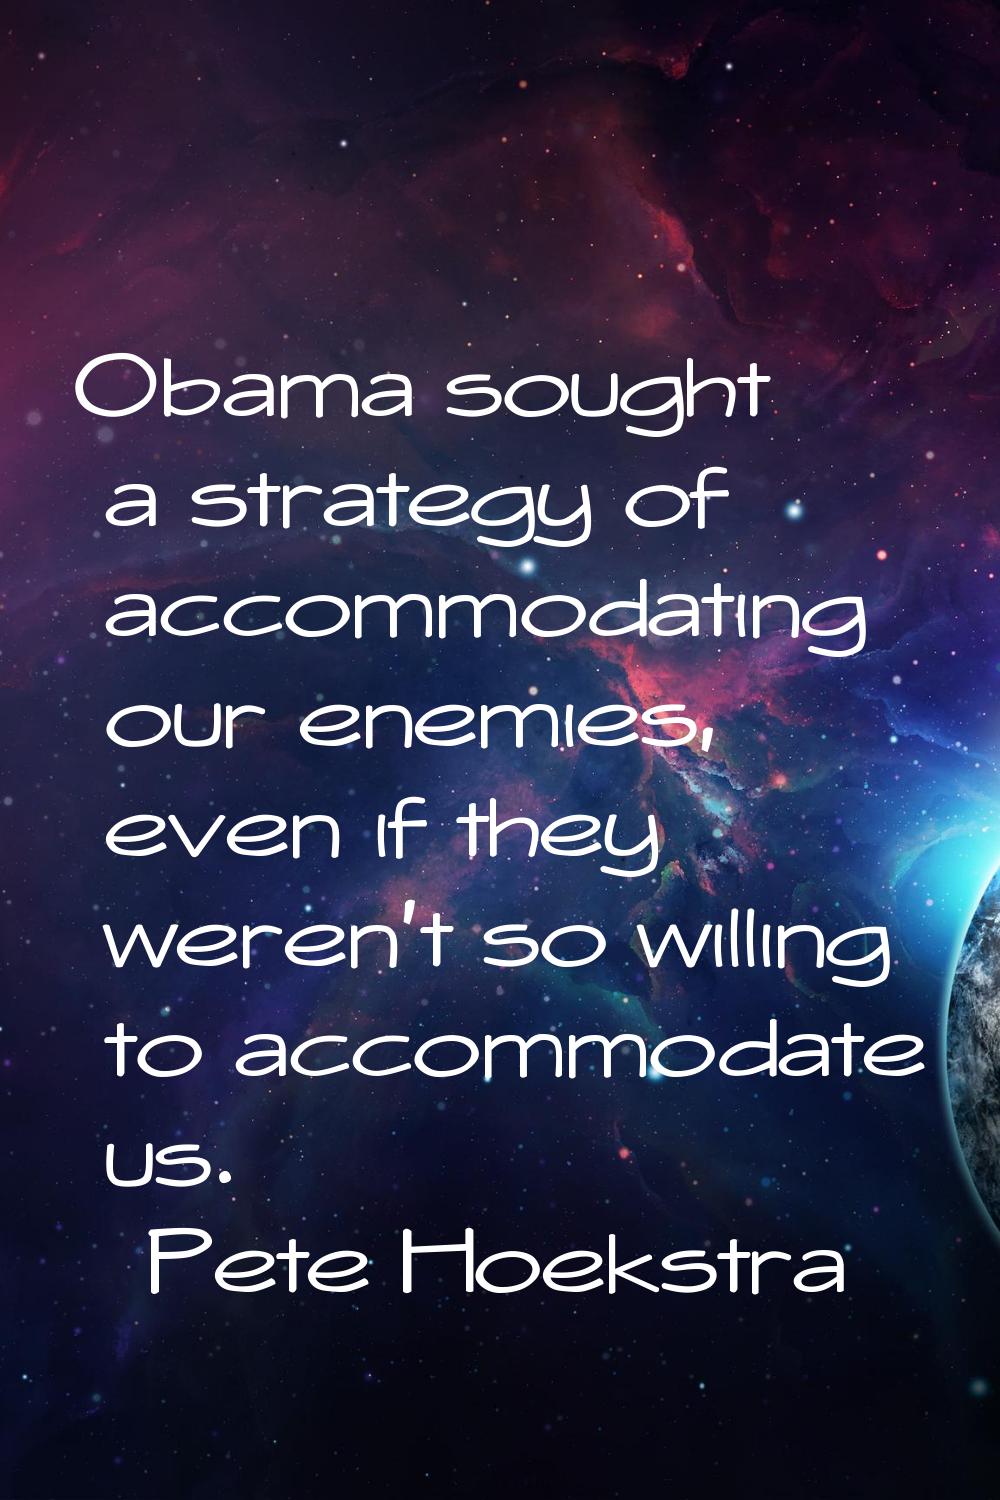 Obama sought a strategy of accommodating our enemies, even if they weren't so willing to accommodat